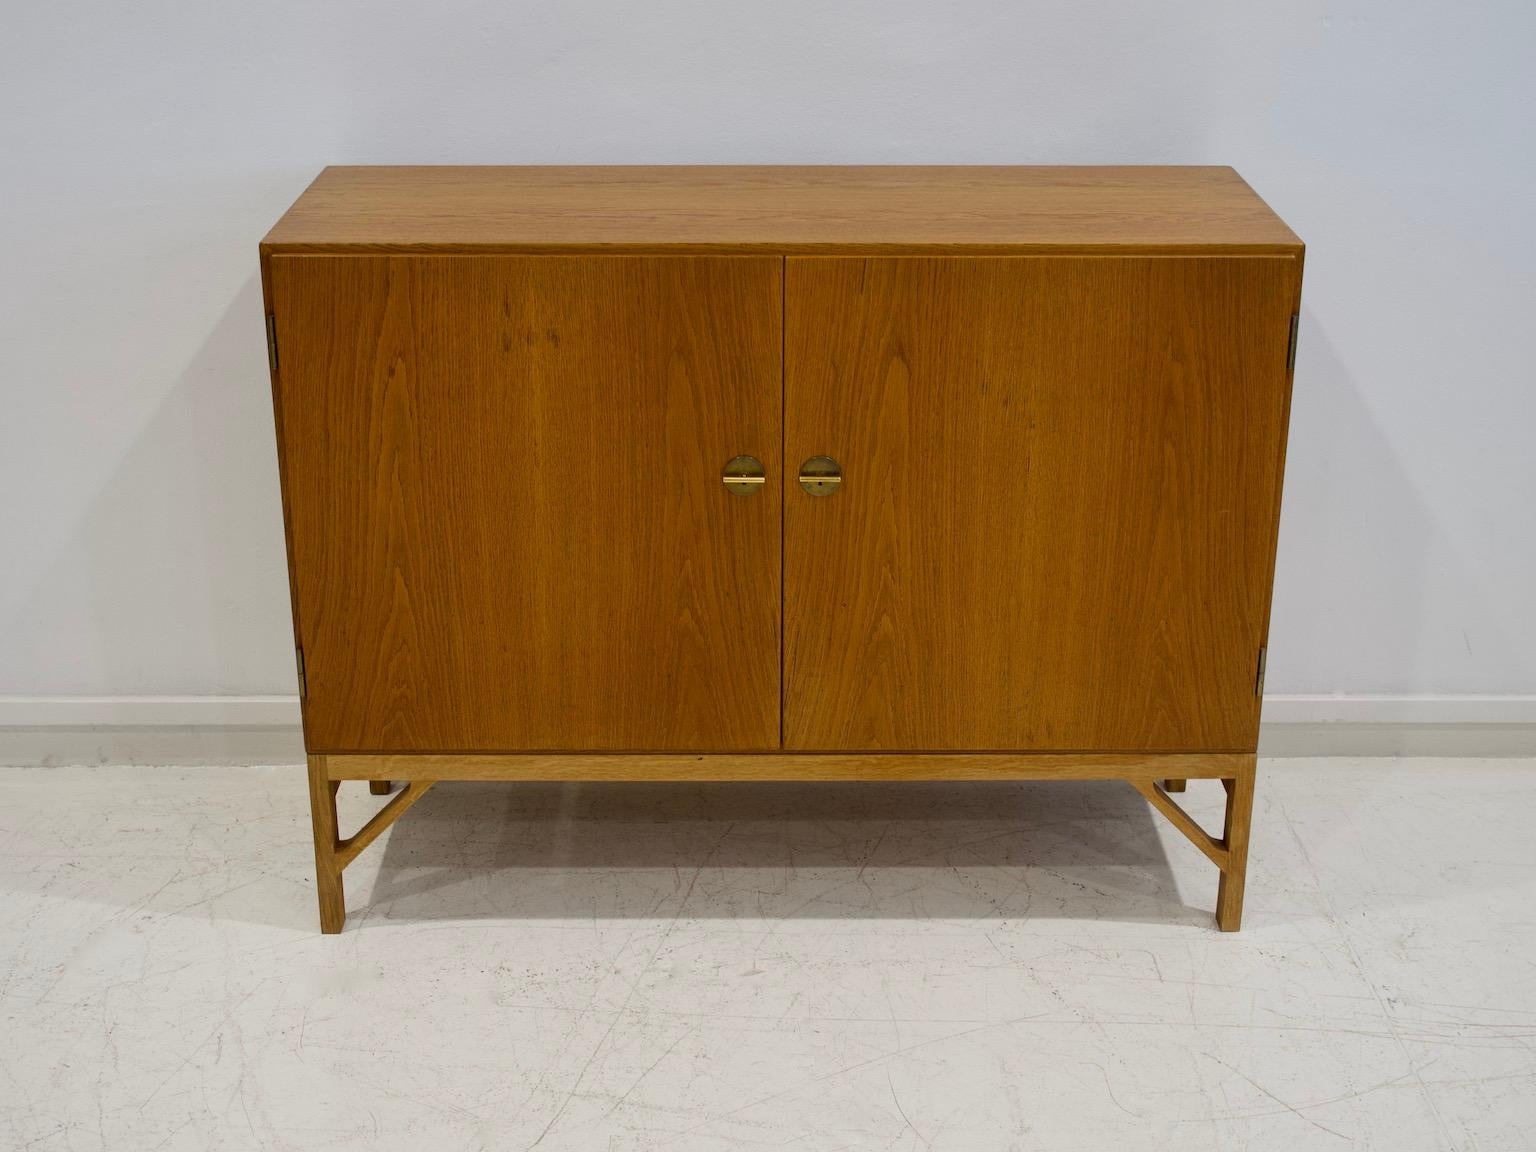 Oak cabinet, model 232, also known as 'China' cabinet, designed by Børge Mogensen and produced by FDB in Denmark. Mounted on later base. Front with two doors and brass keys that serve as handles. Inside with shelves and pullout trays. Manufactured